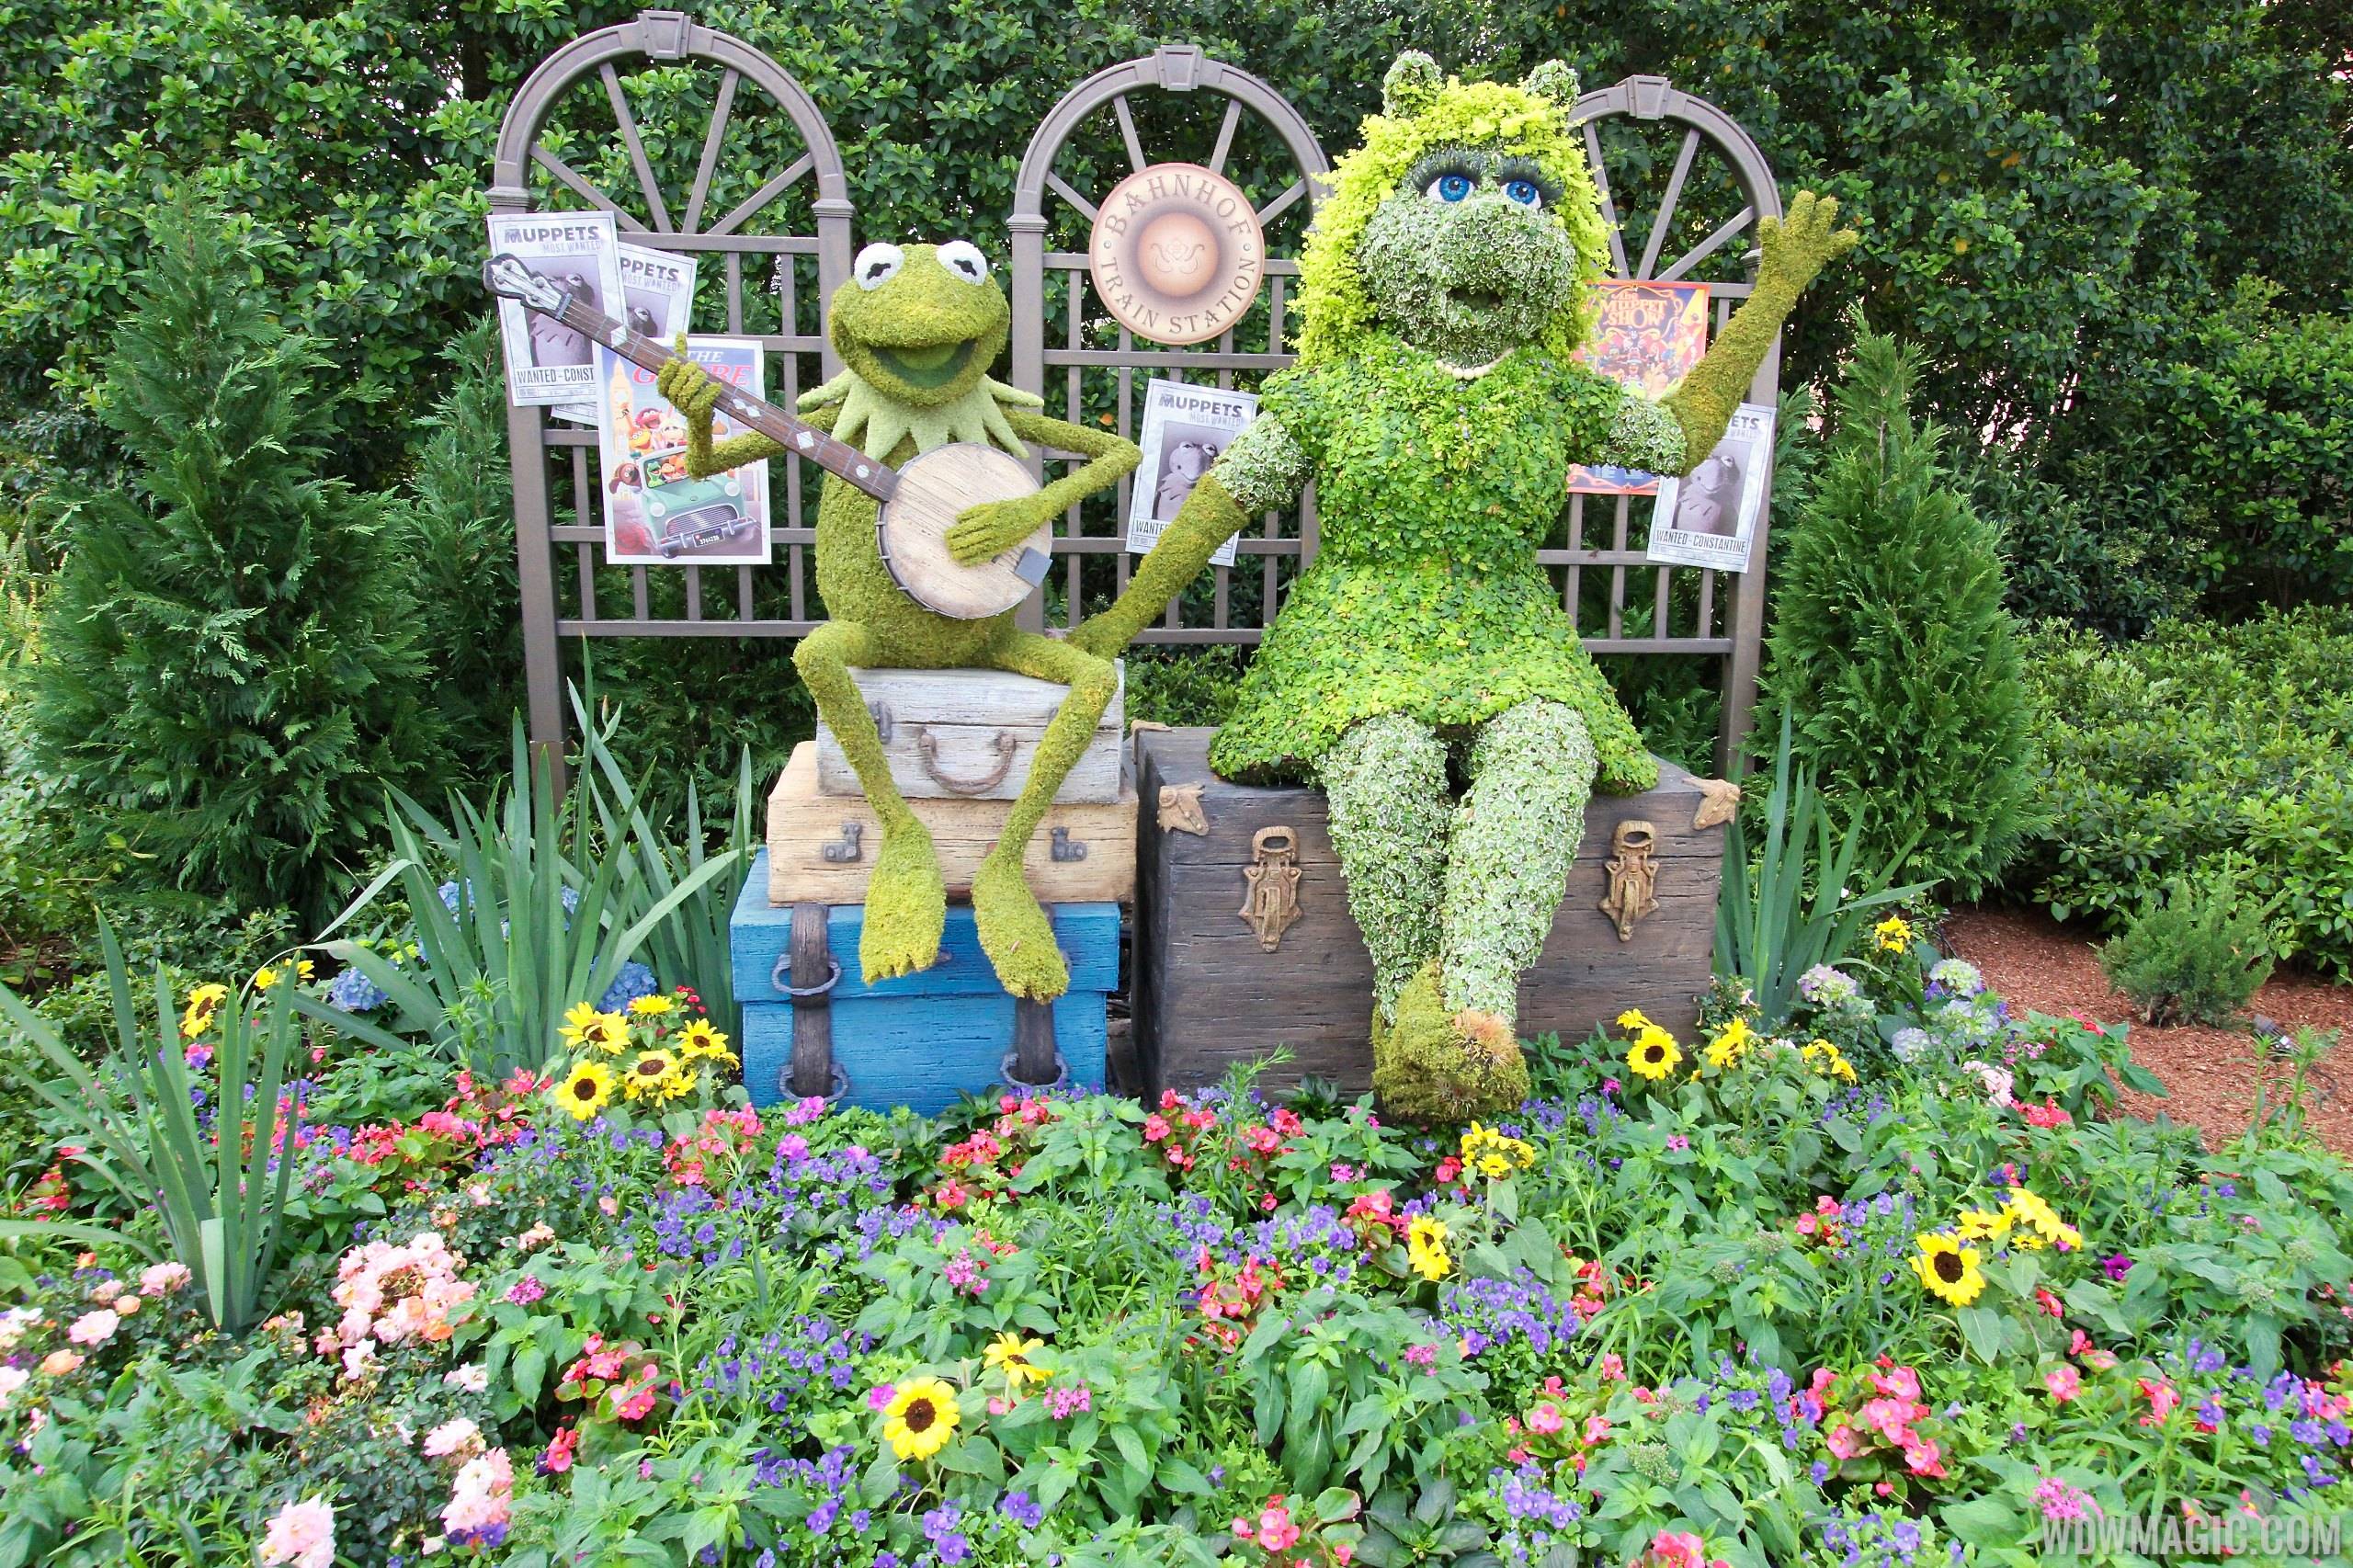 2014 Epcot Flower and Garden Festival - Kermit and Miss Piggy Muppets topiary